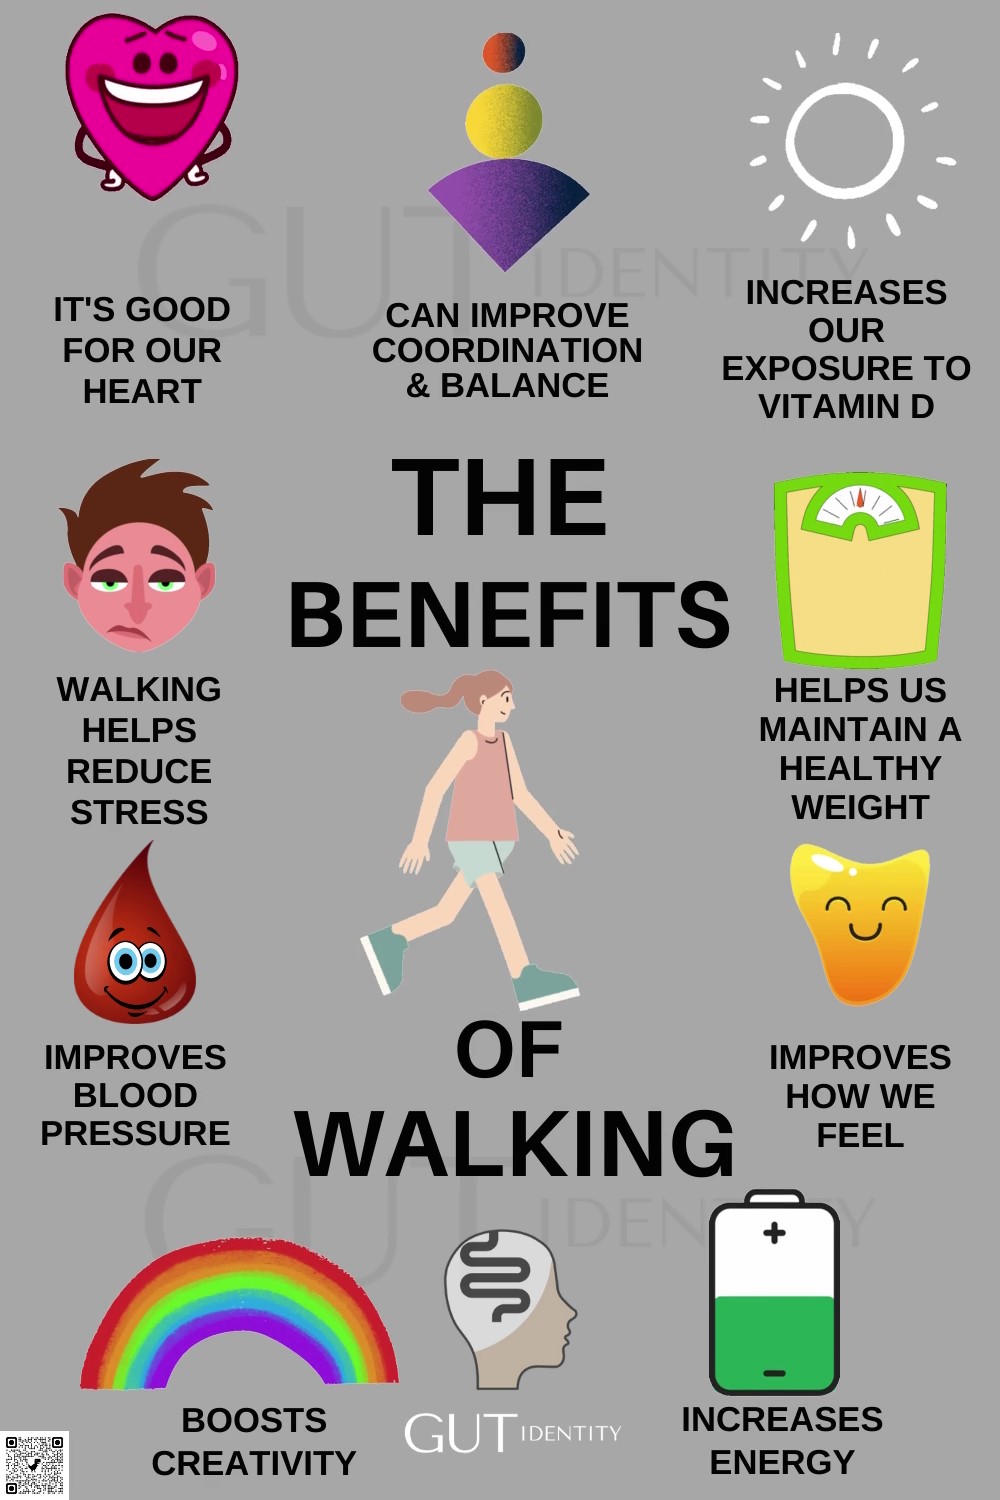 The Benefits of Walking - By Gutidentity